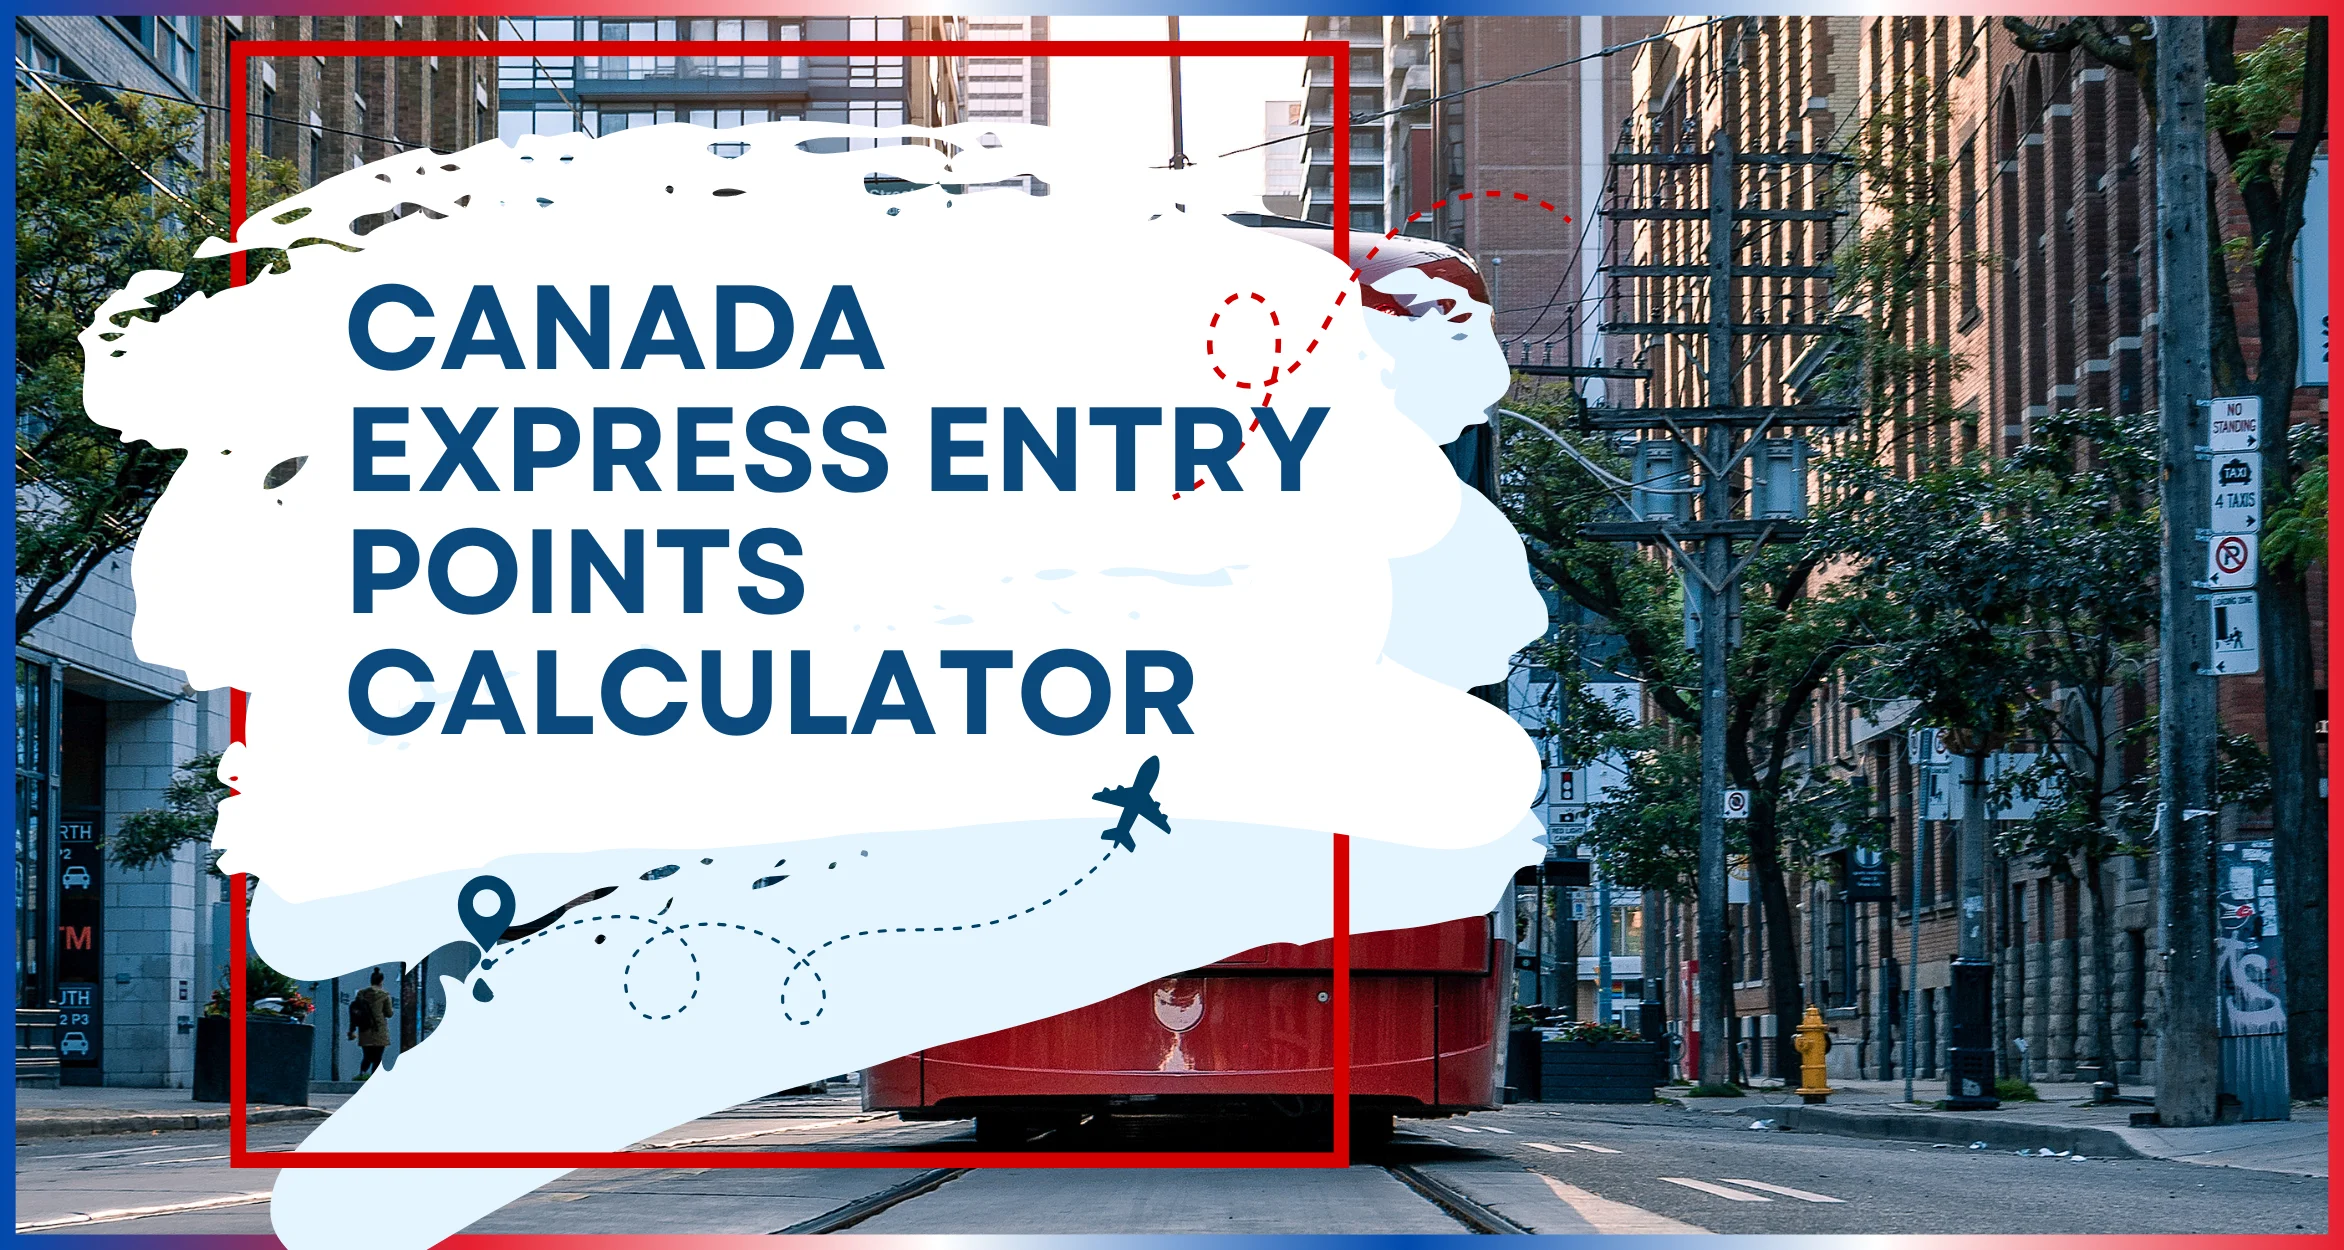 Canada express entry points calculator